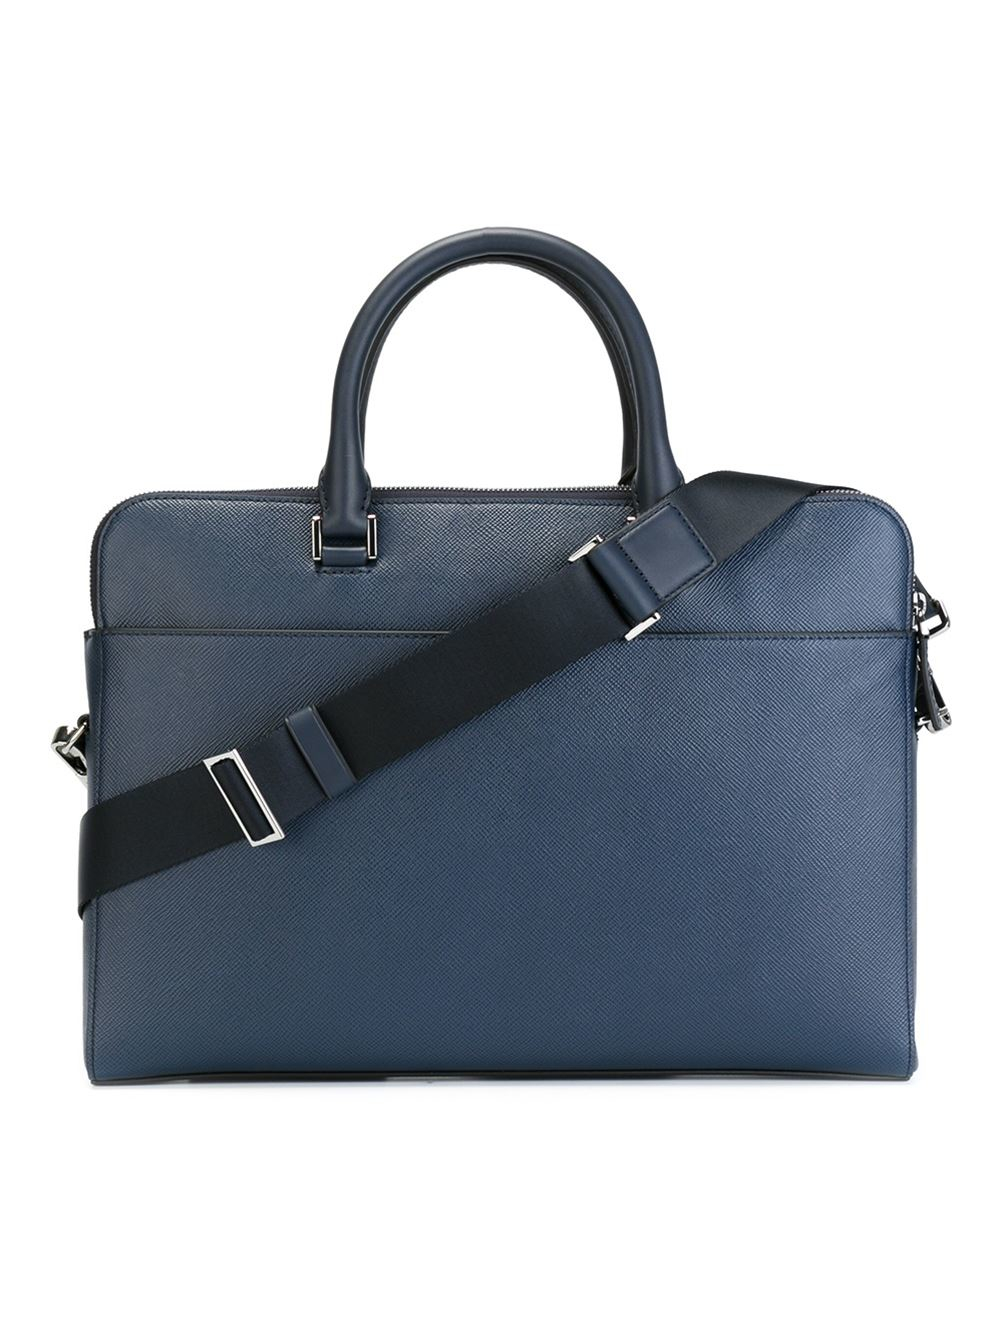 Michael Kors Leather 'harrison' Briefcase in Blue for Men - Lyst